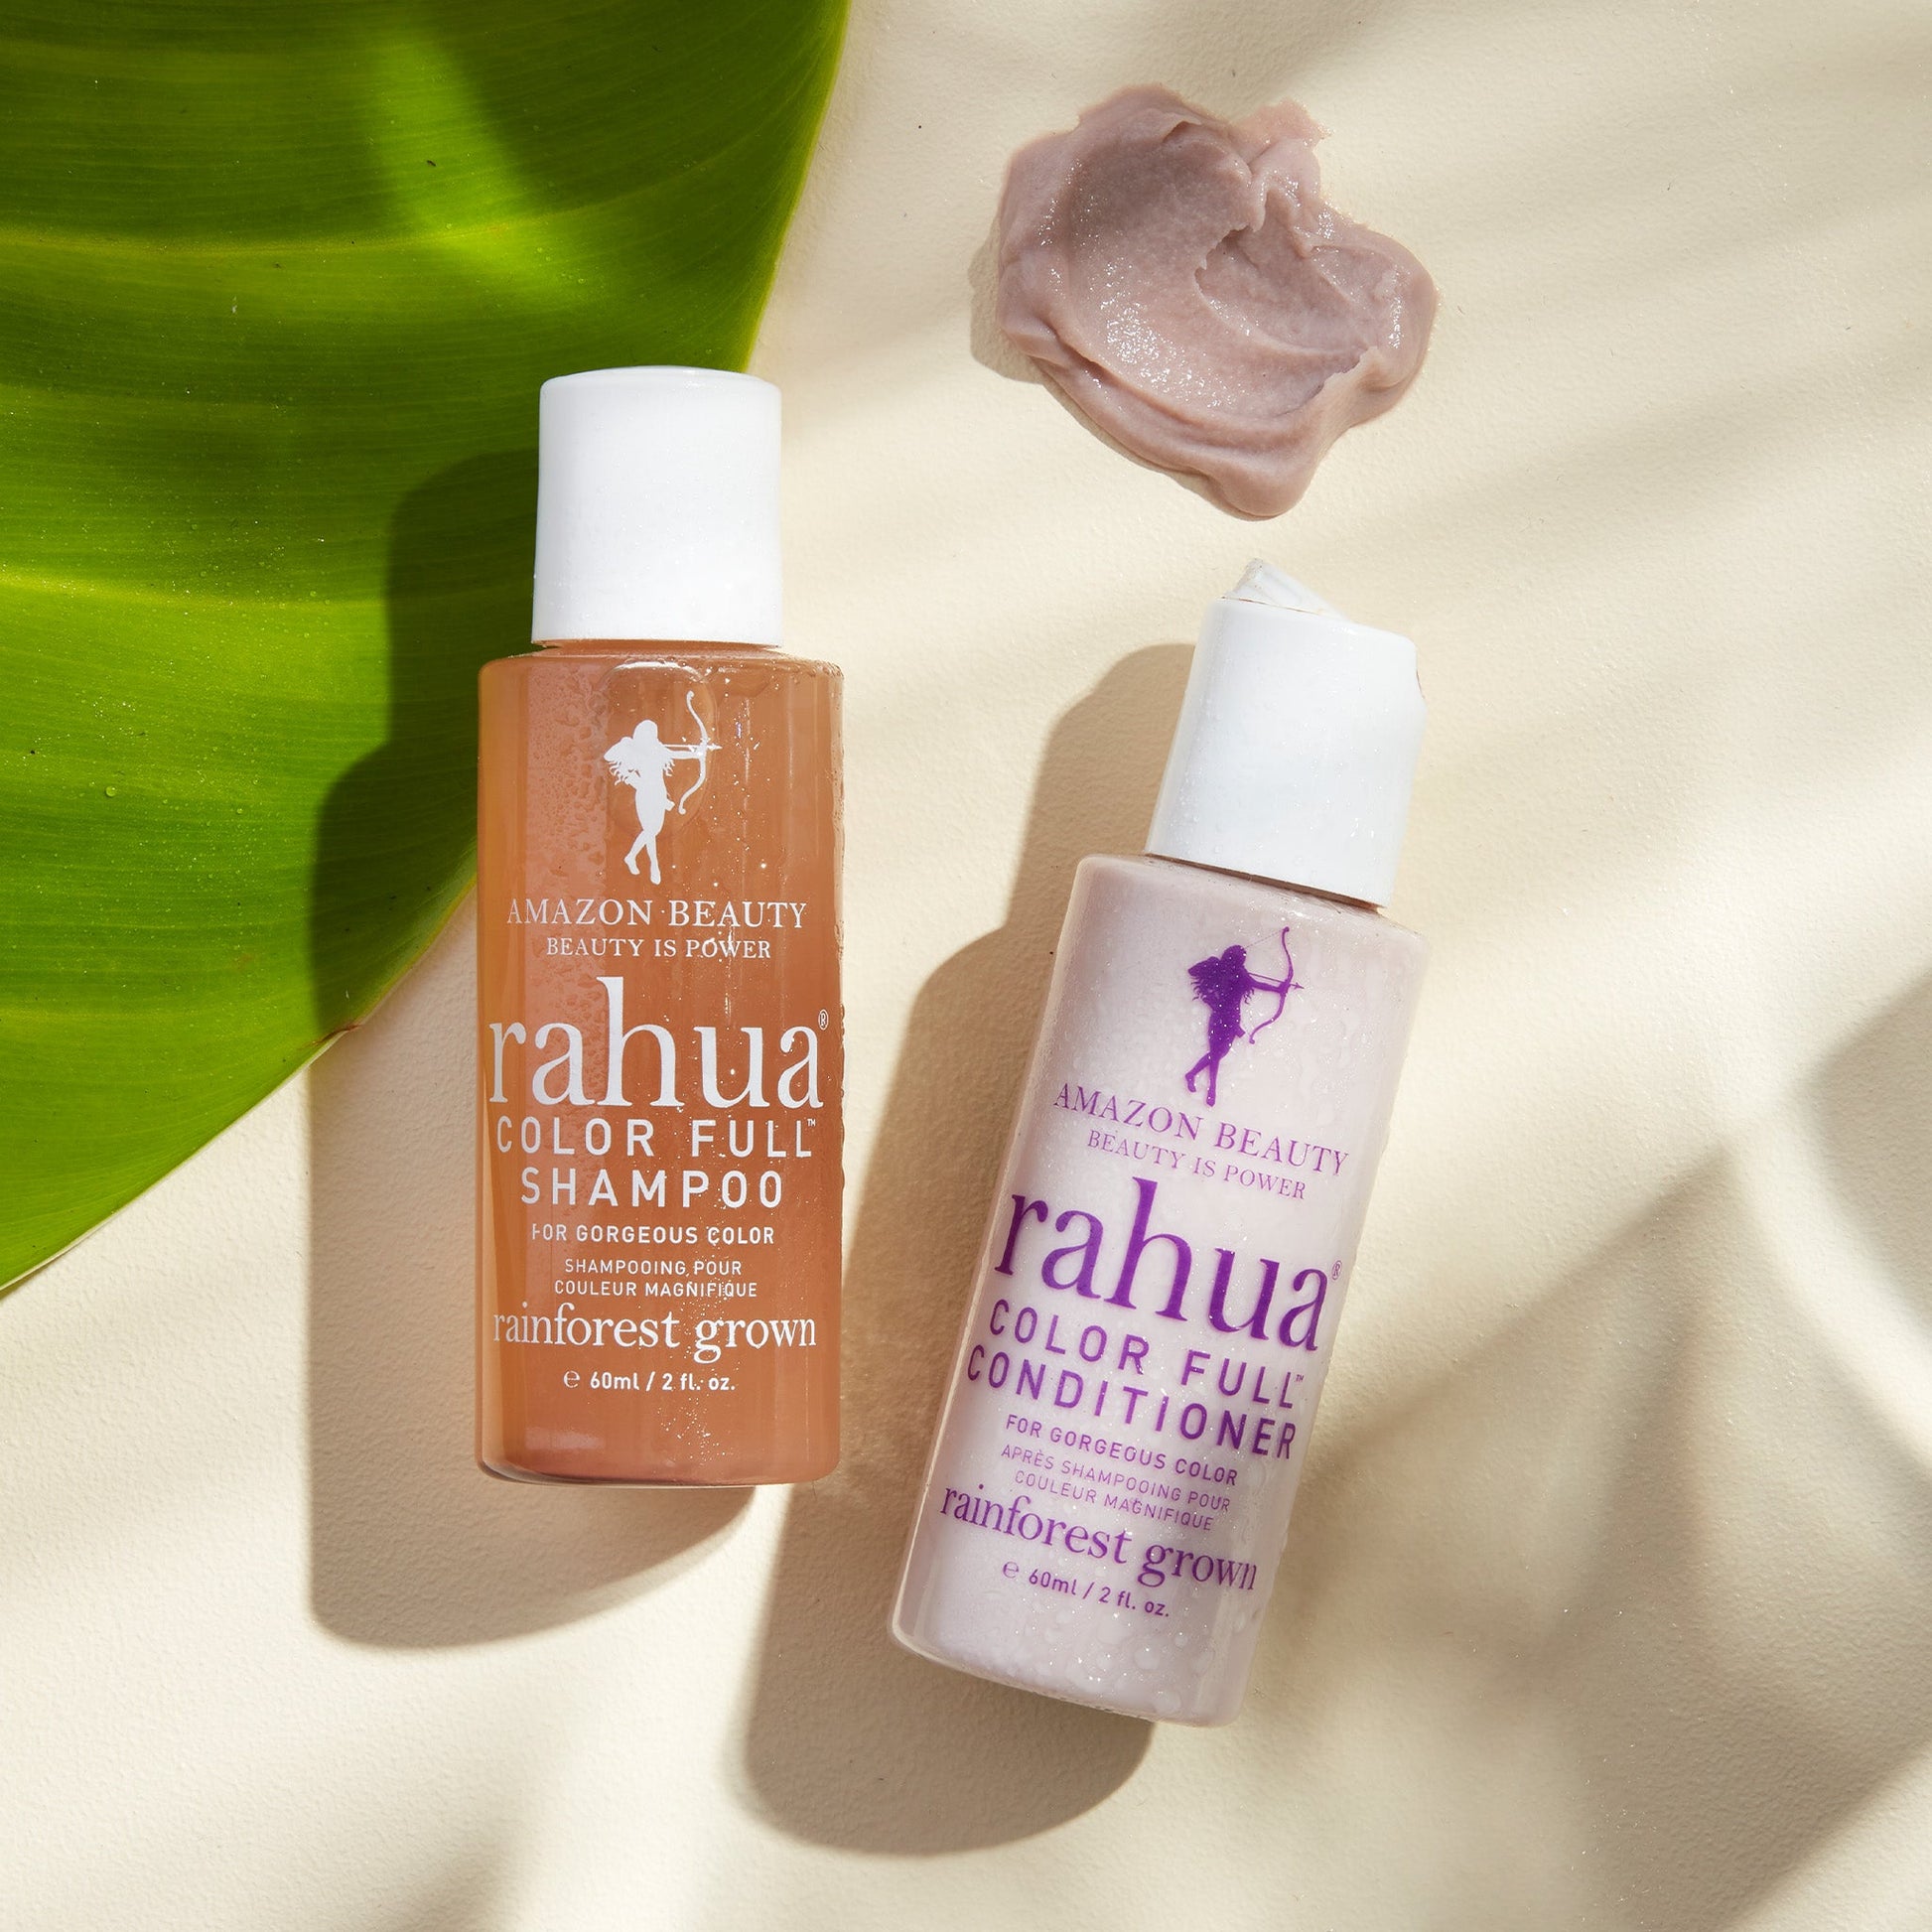 rahua color full shampoo and conditioner travel size with thick creamy condotioner texture